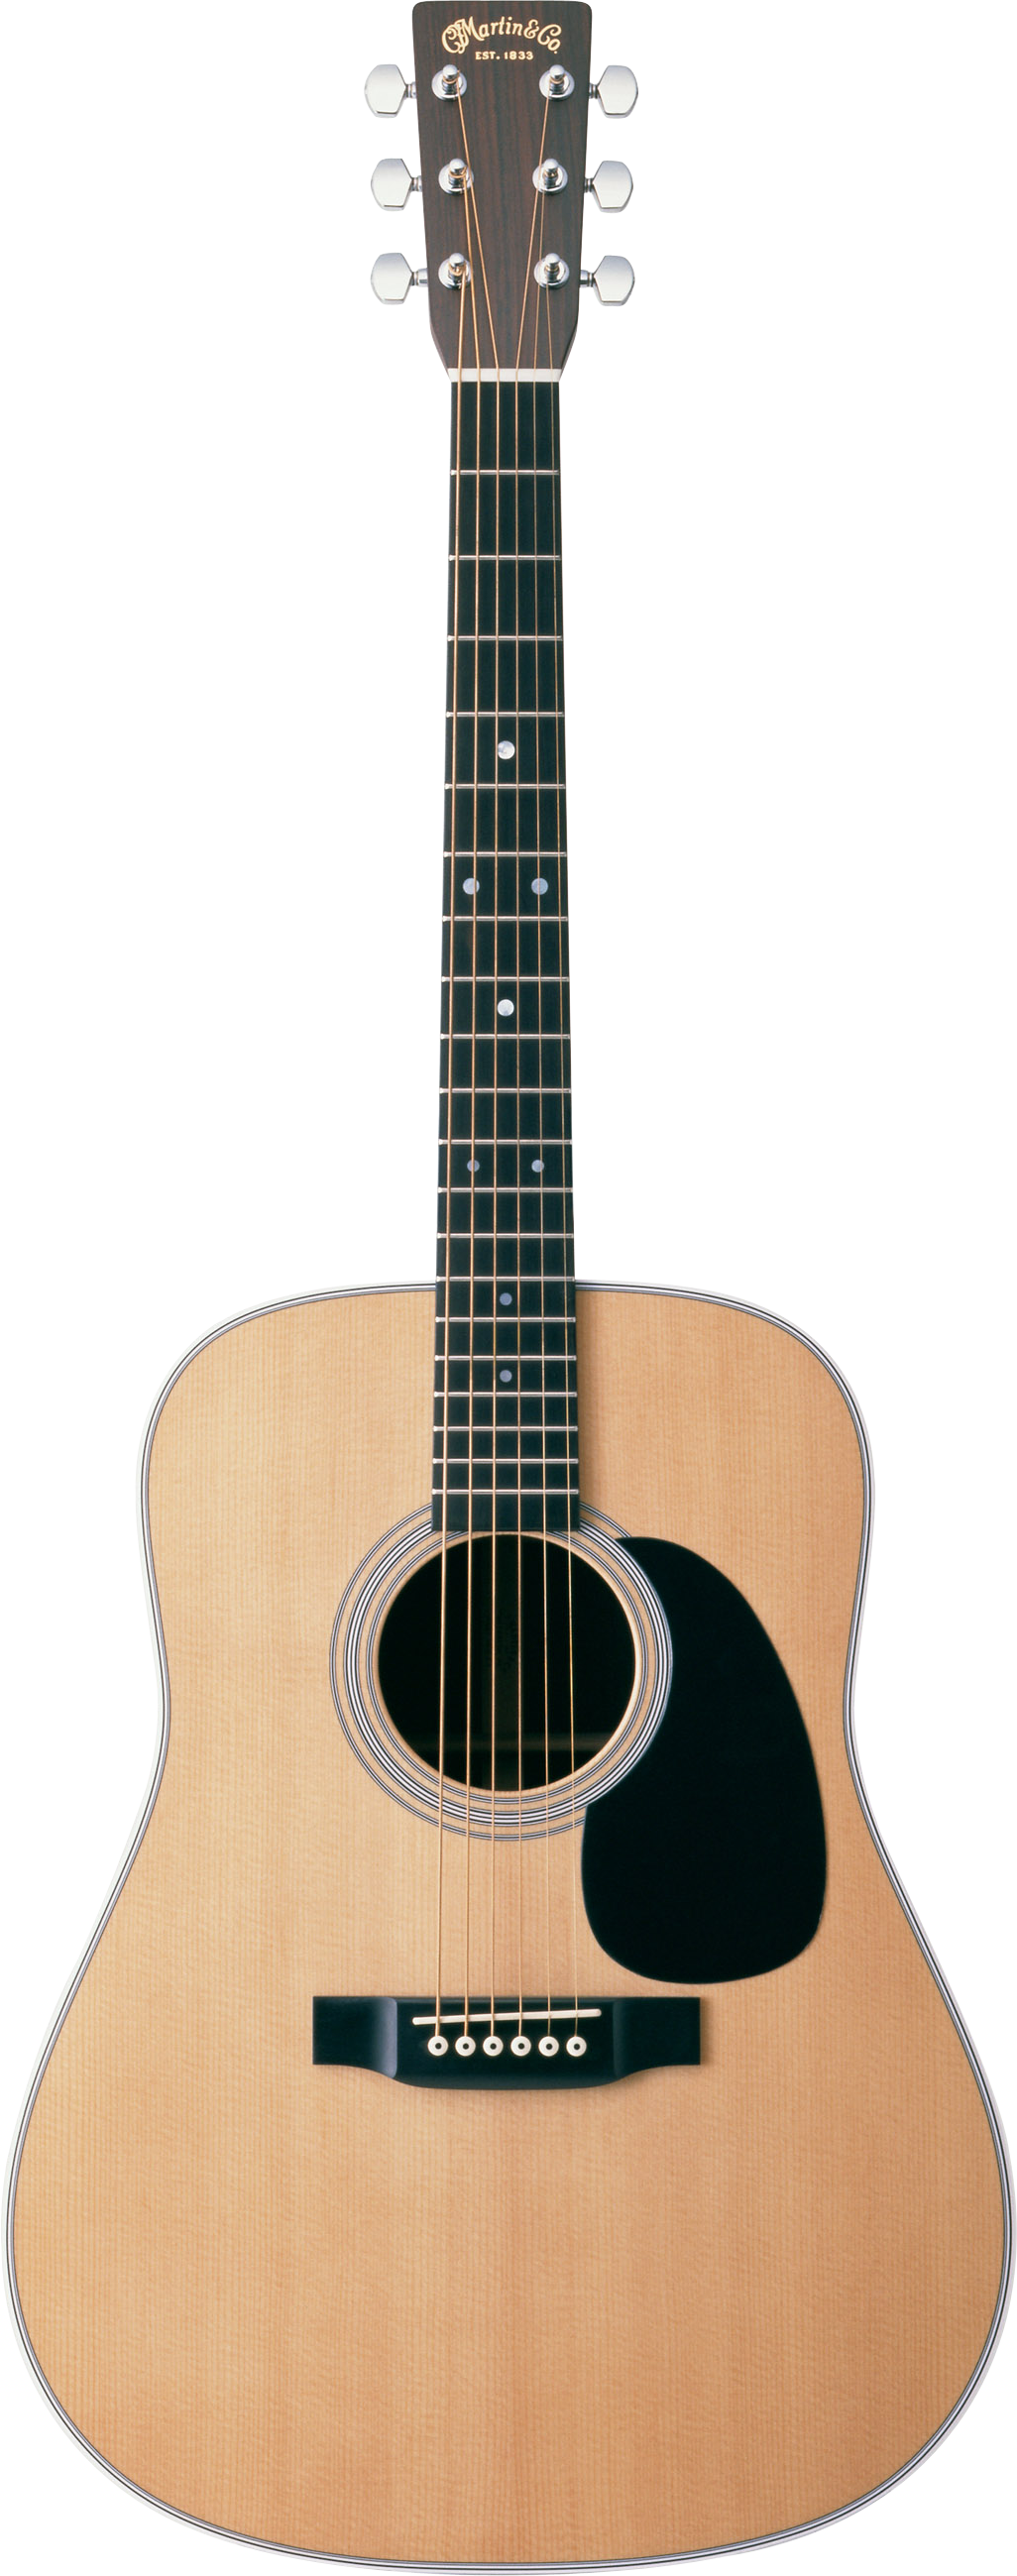 Acoustic Guitar Free Png Image - Acoustic, Transparent background PNG HD thumbnail